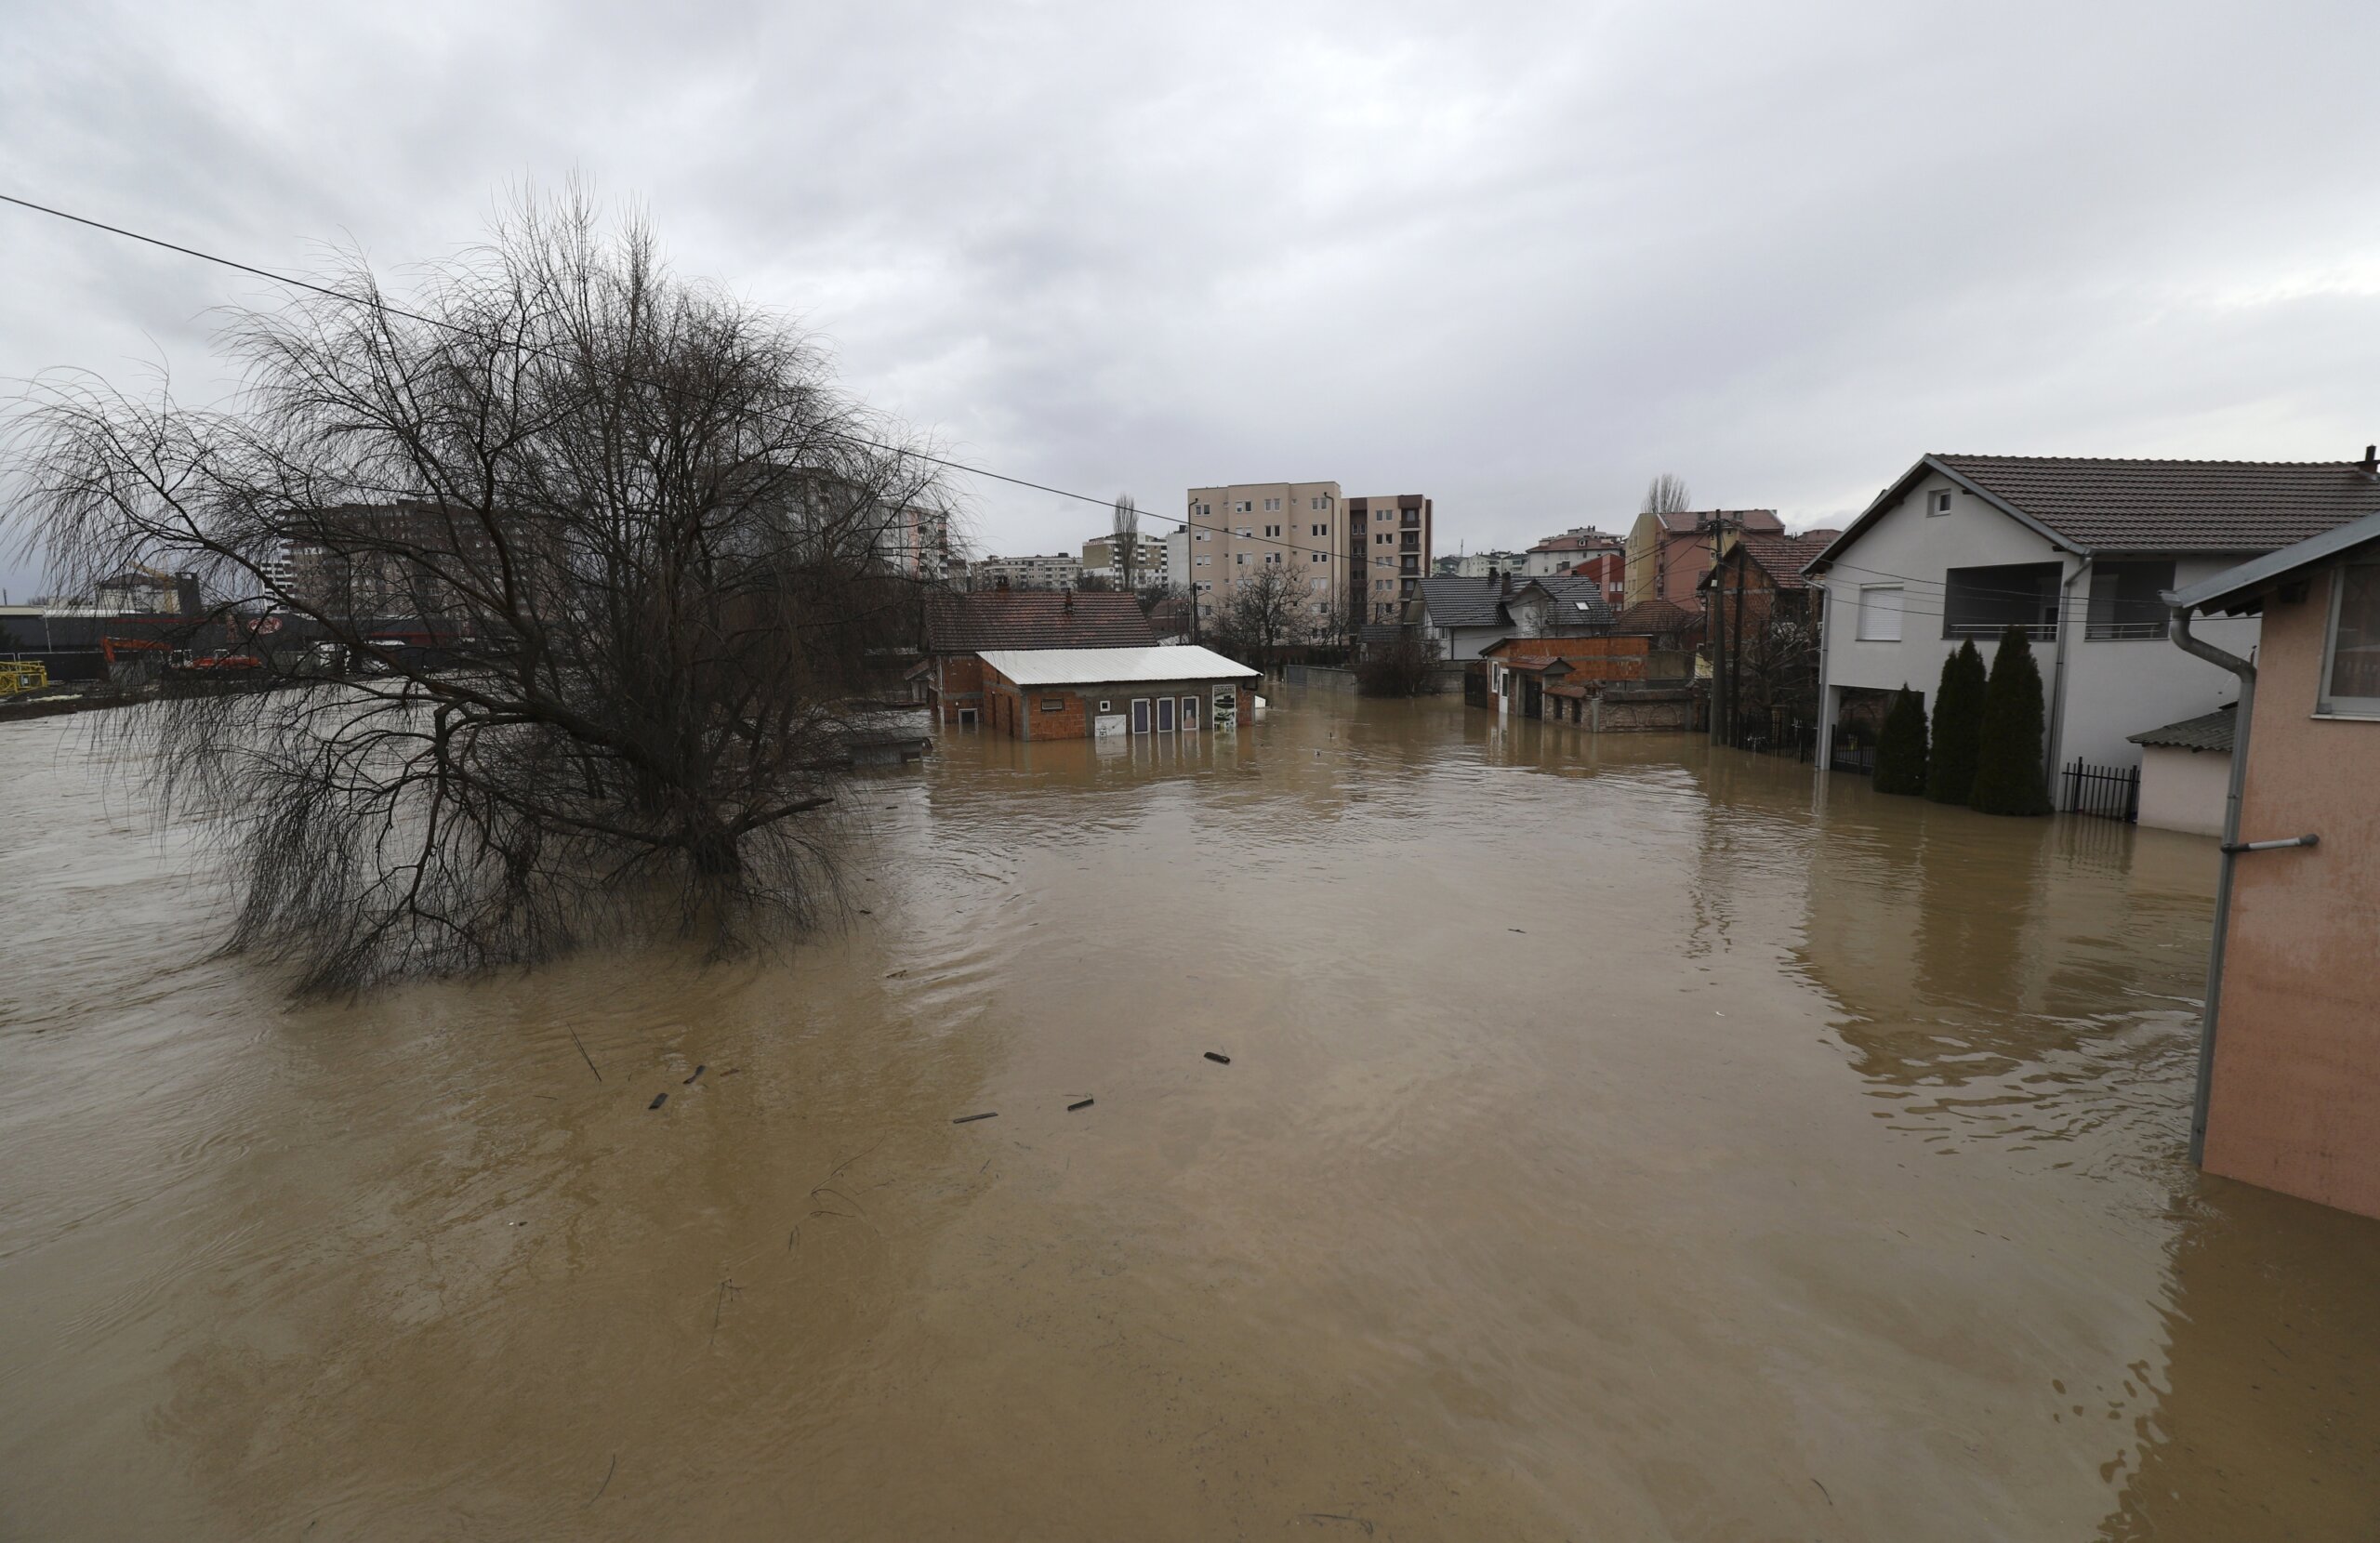 Man’s body found in Serbia as Balkans struggles with floods